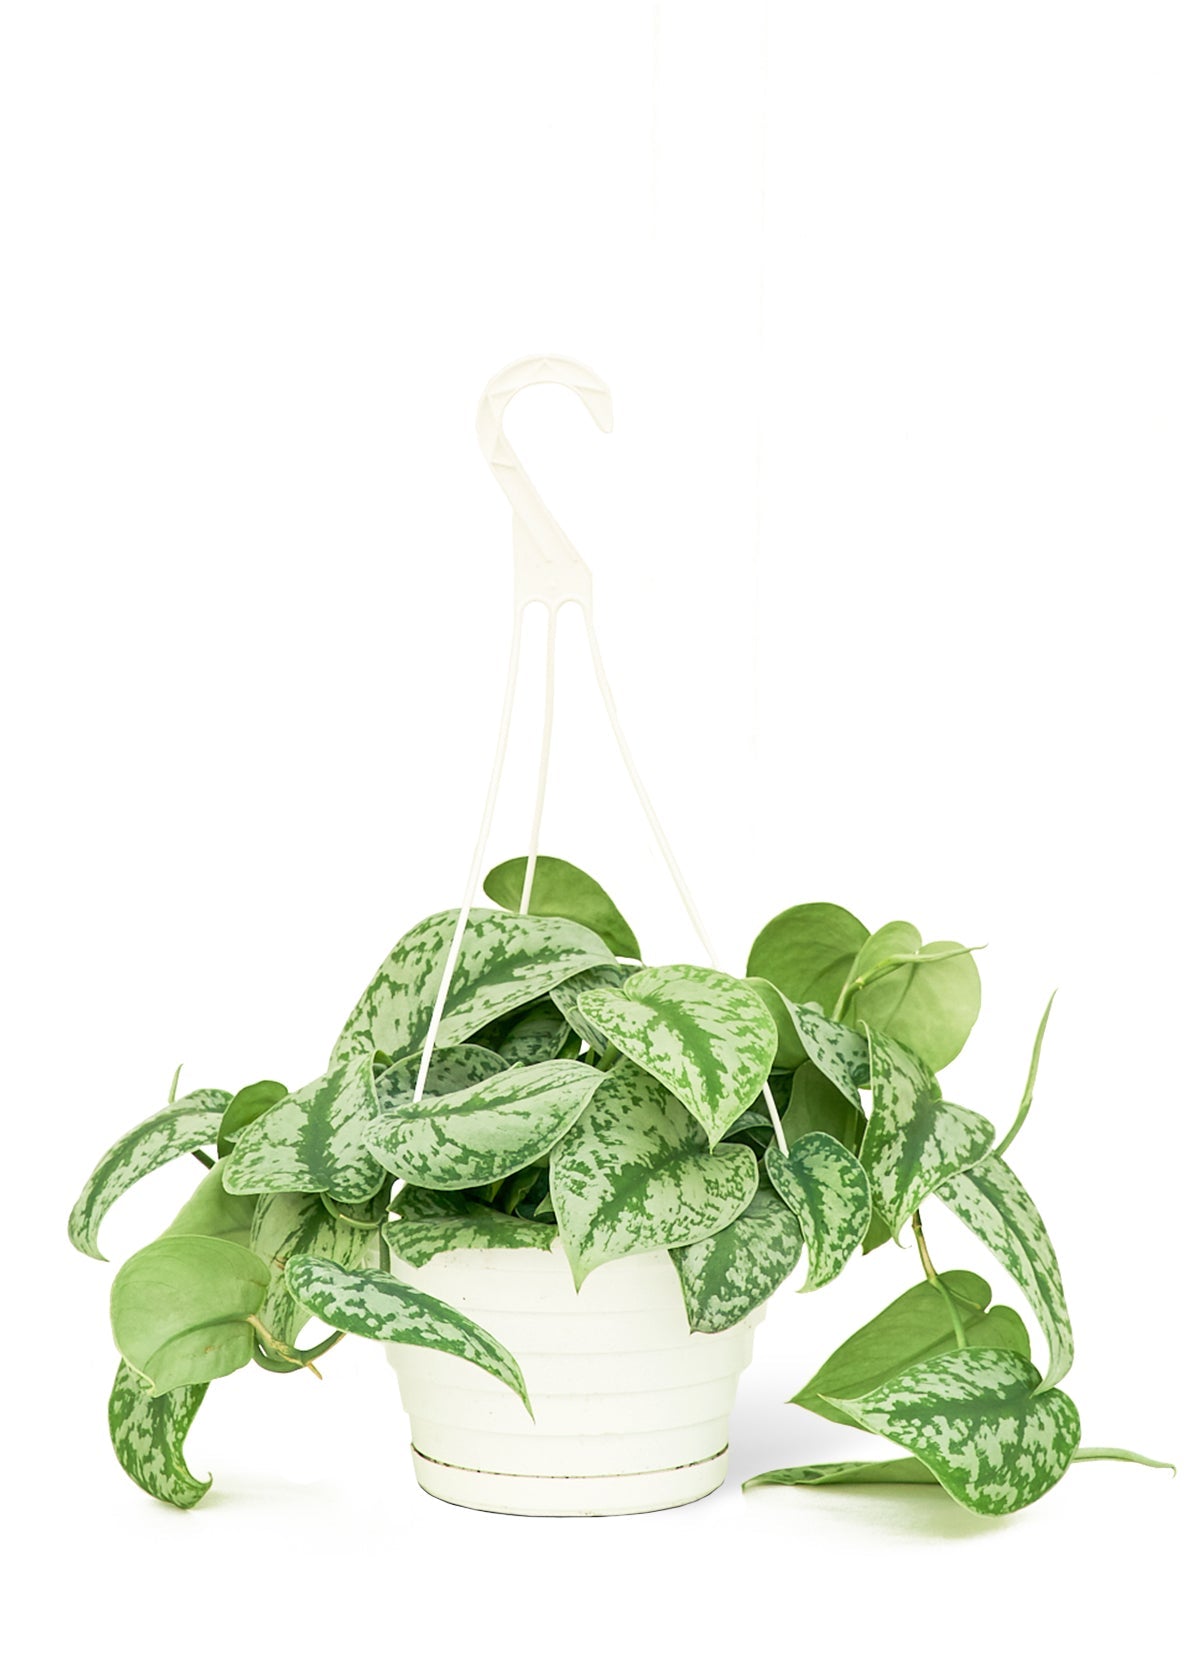 Silver Pothos 'Exotica', Large - SunSwill Plant Shop